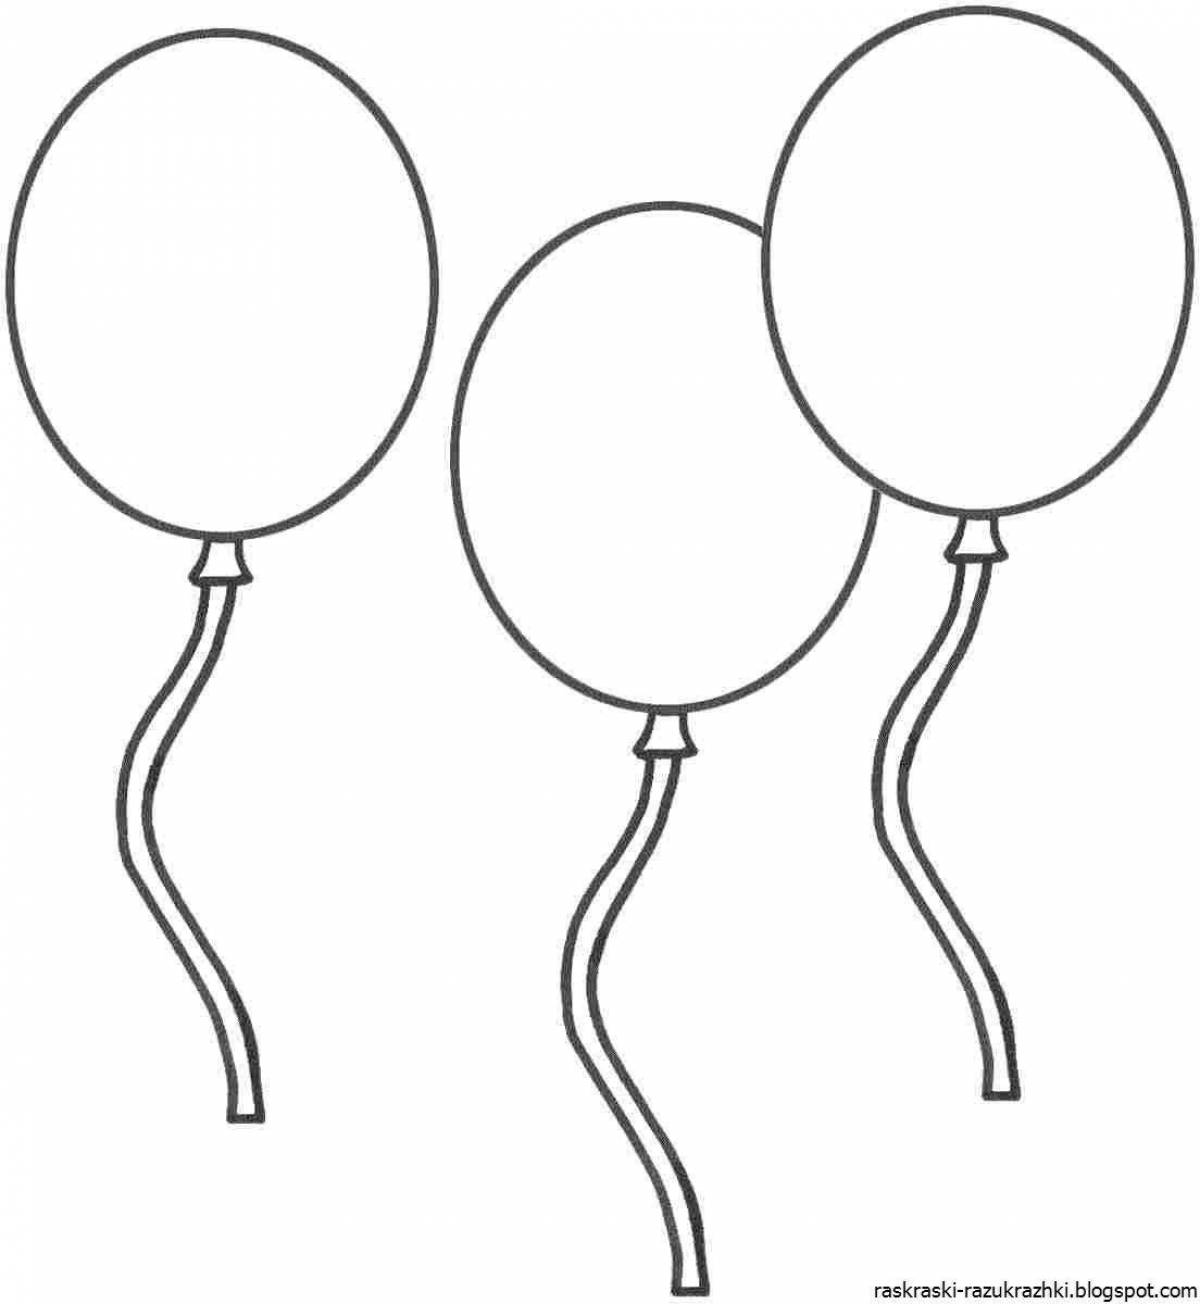 Fancy balloons coloring book for 2-3 year olds